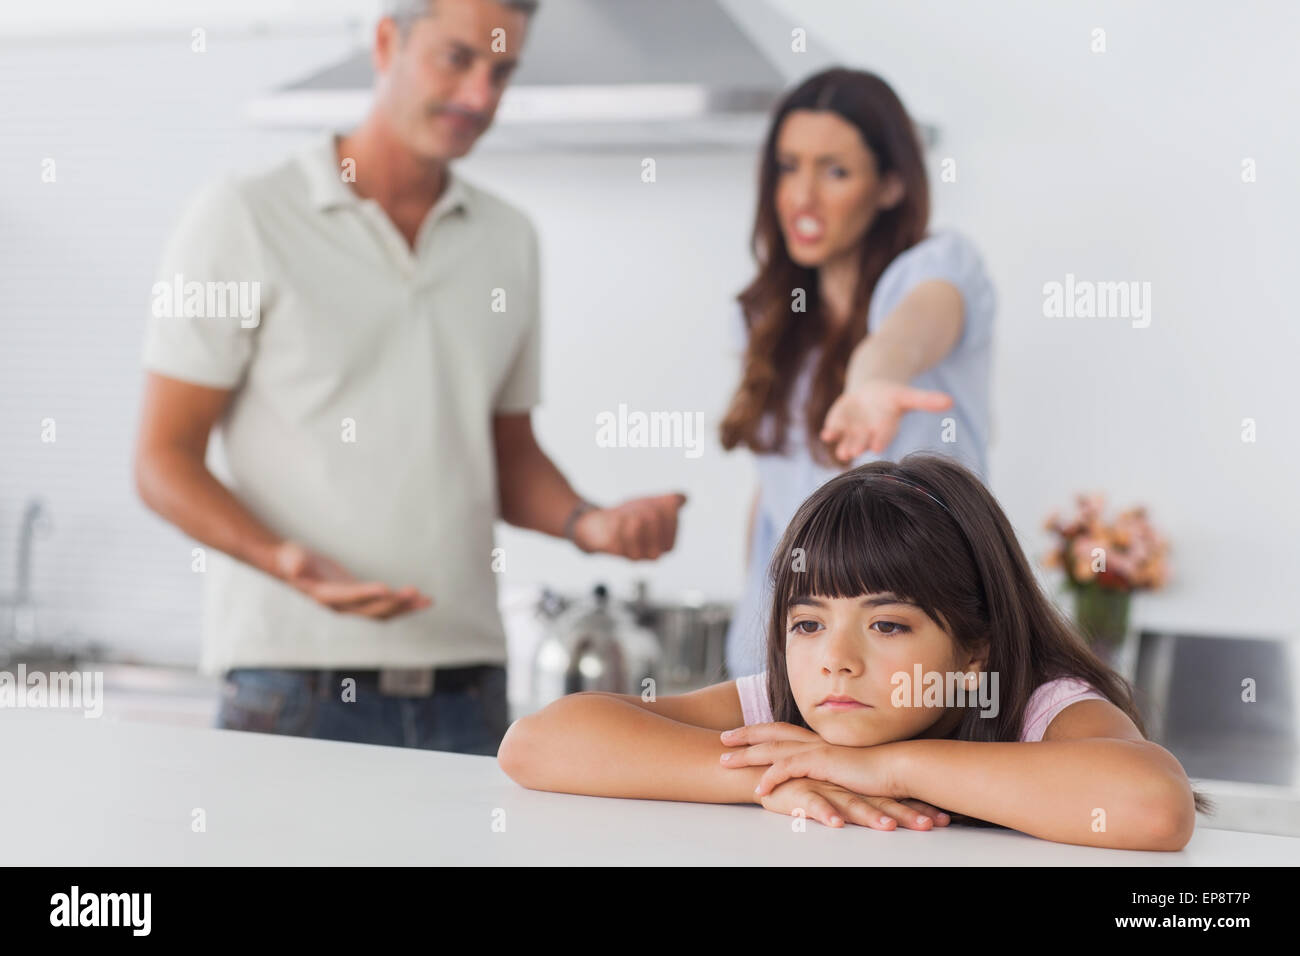 Couple having dispute in front of their upset daughter Stock Photo